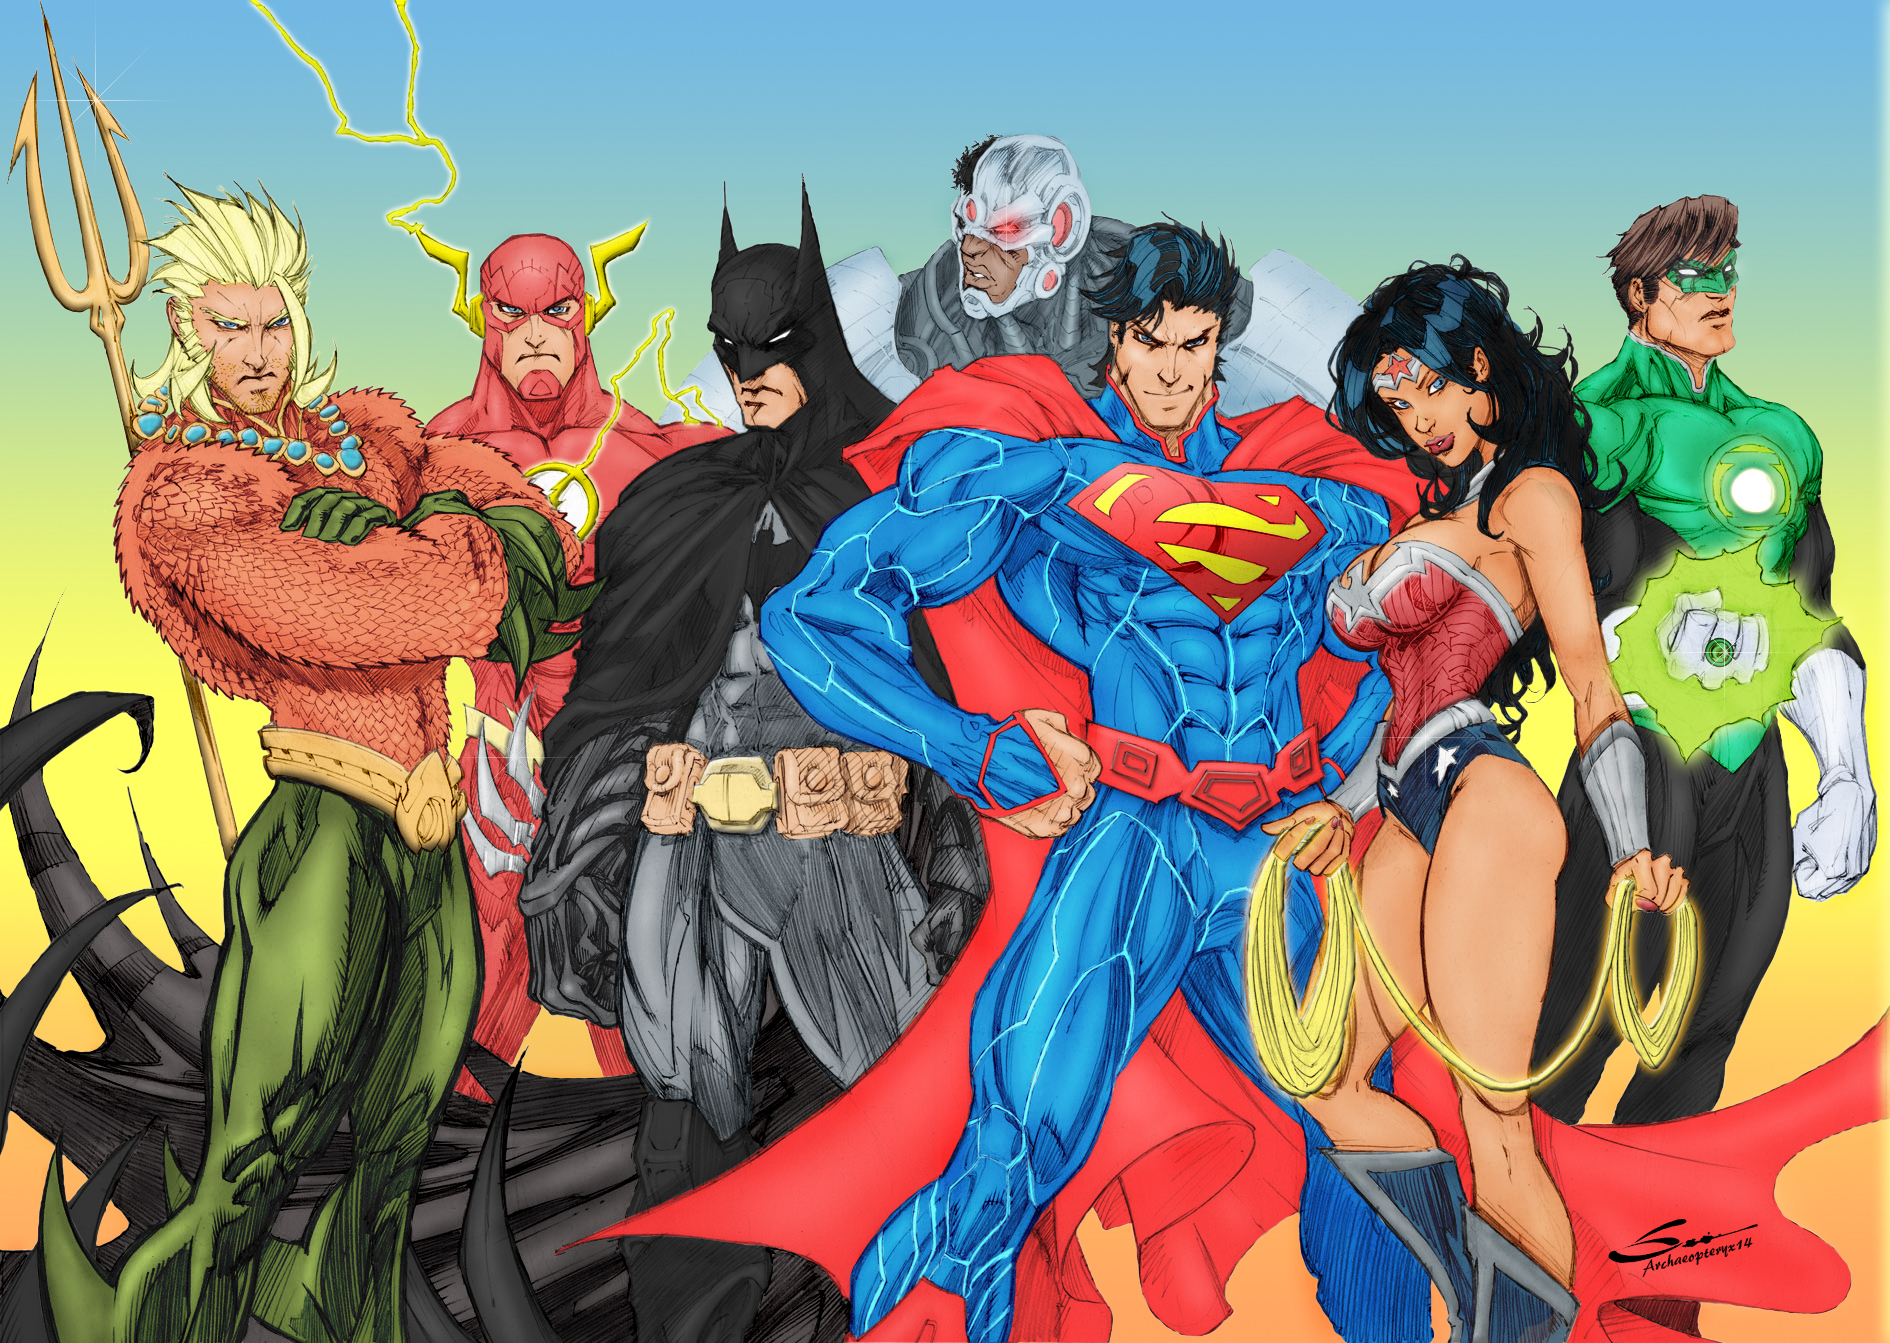  of Justice League wallpapers and images   wallpapers pictures photos